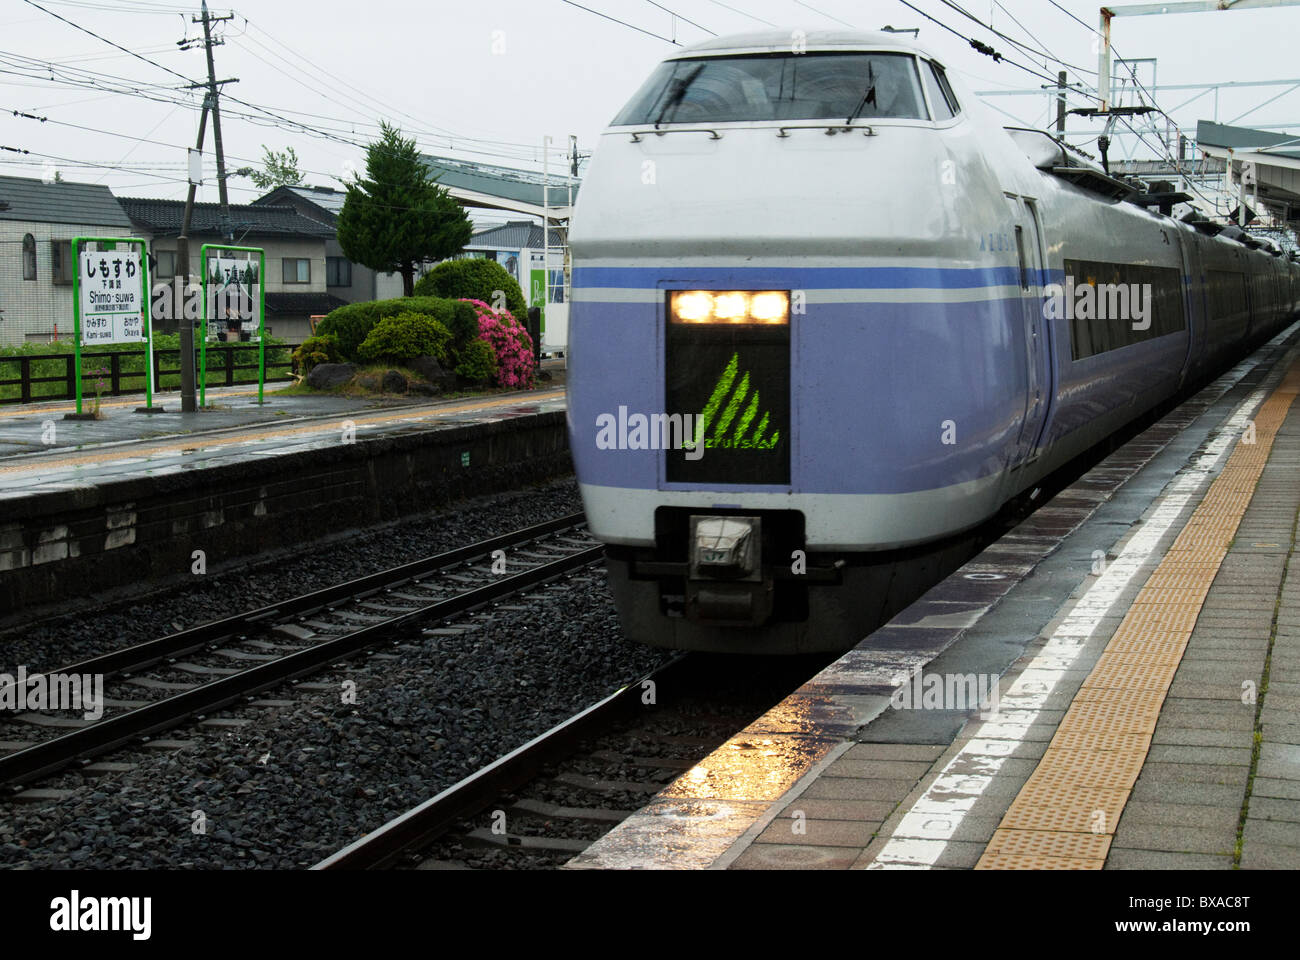 The Azusa Limited Express train pulls into Shimosuwa Station on central Japan's Chuo Line. Stock Photo